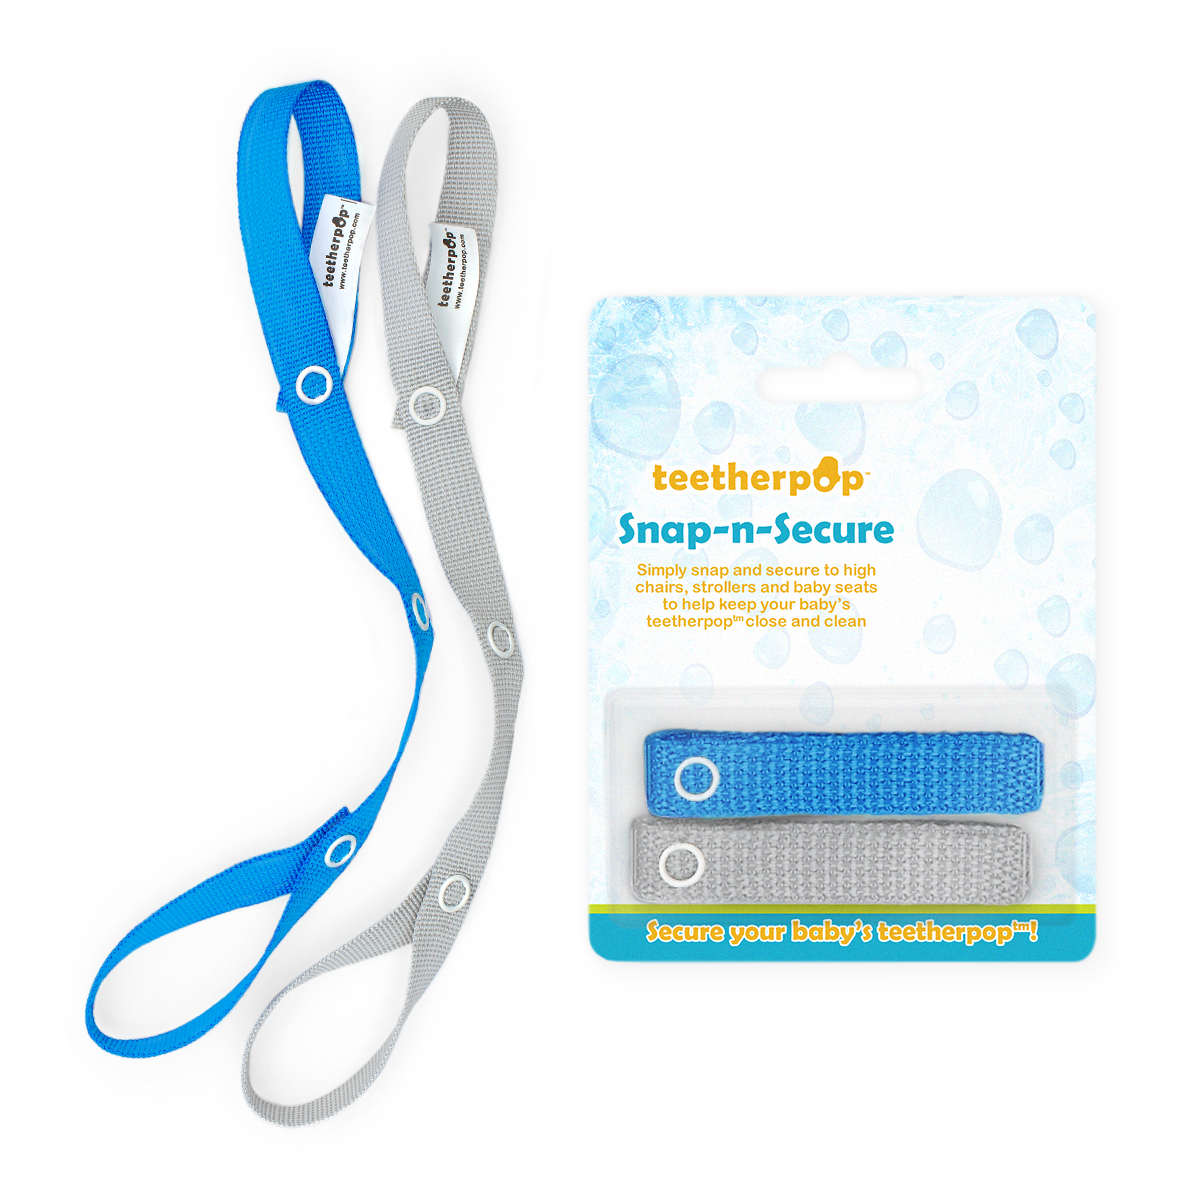 Teetherpop™ Snap and Secure - Keep Your Baby's Items Close and